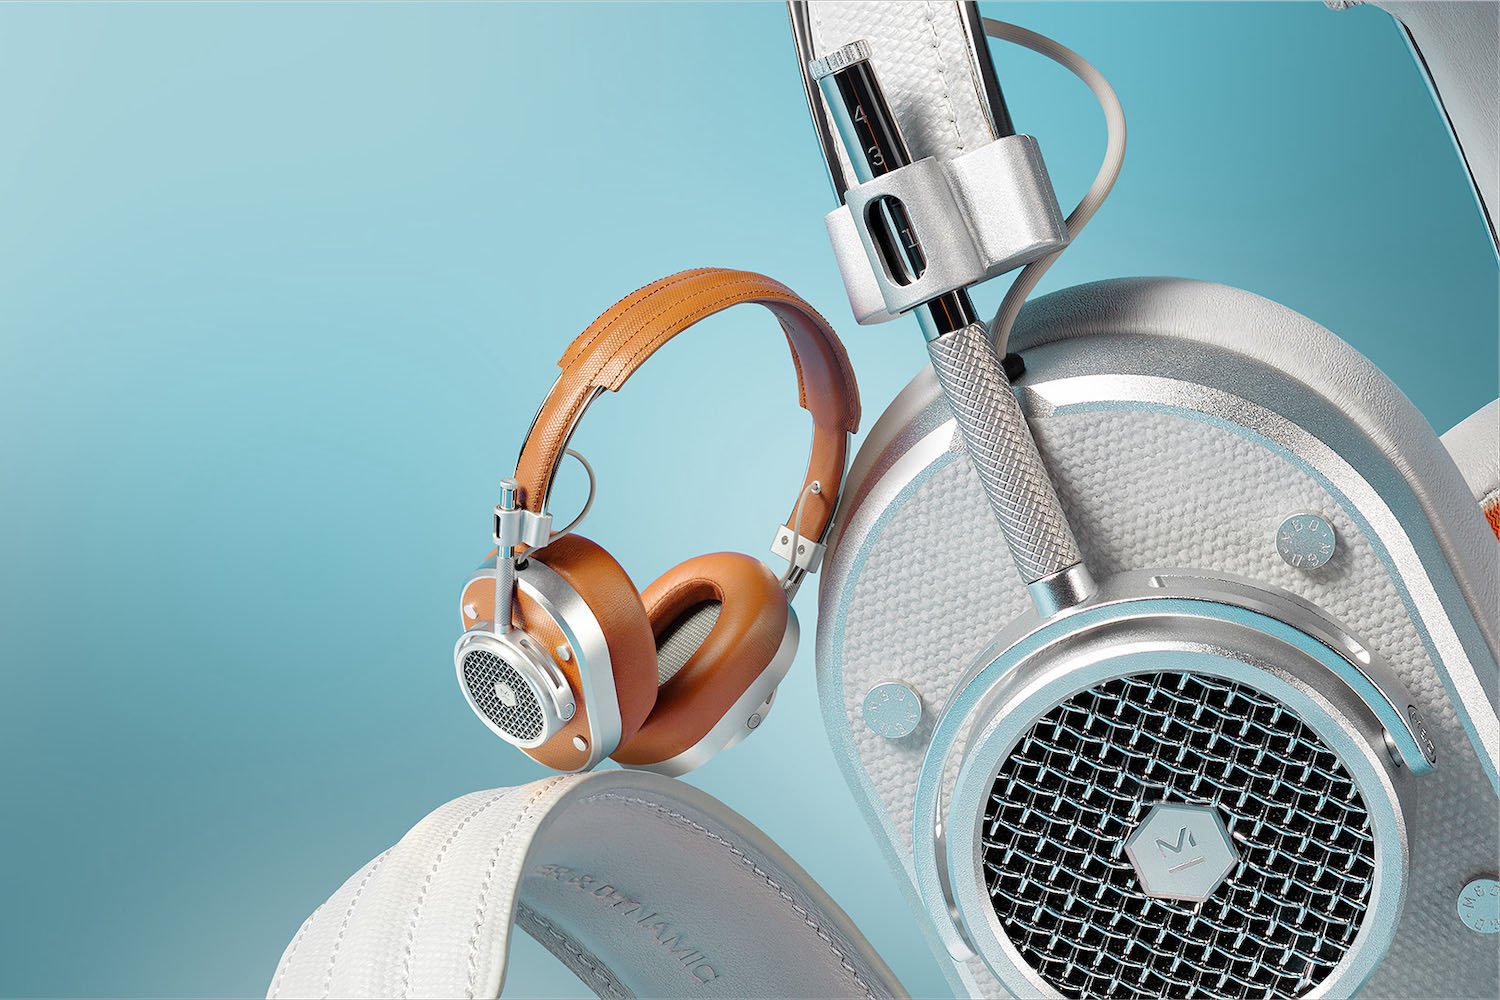 an image of the Master & Dynamic MH40 Headphones on a blue background